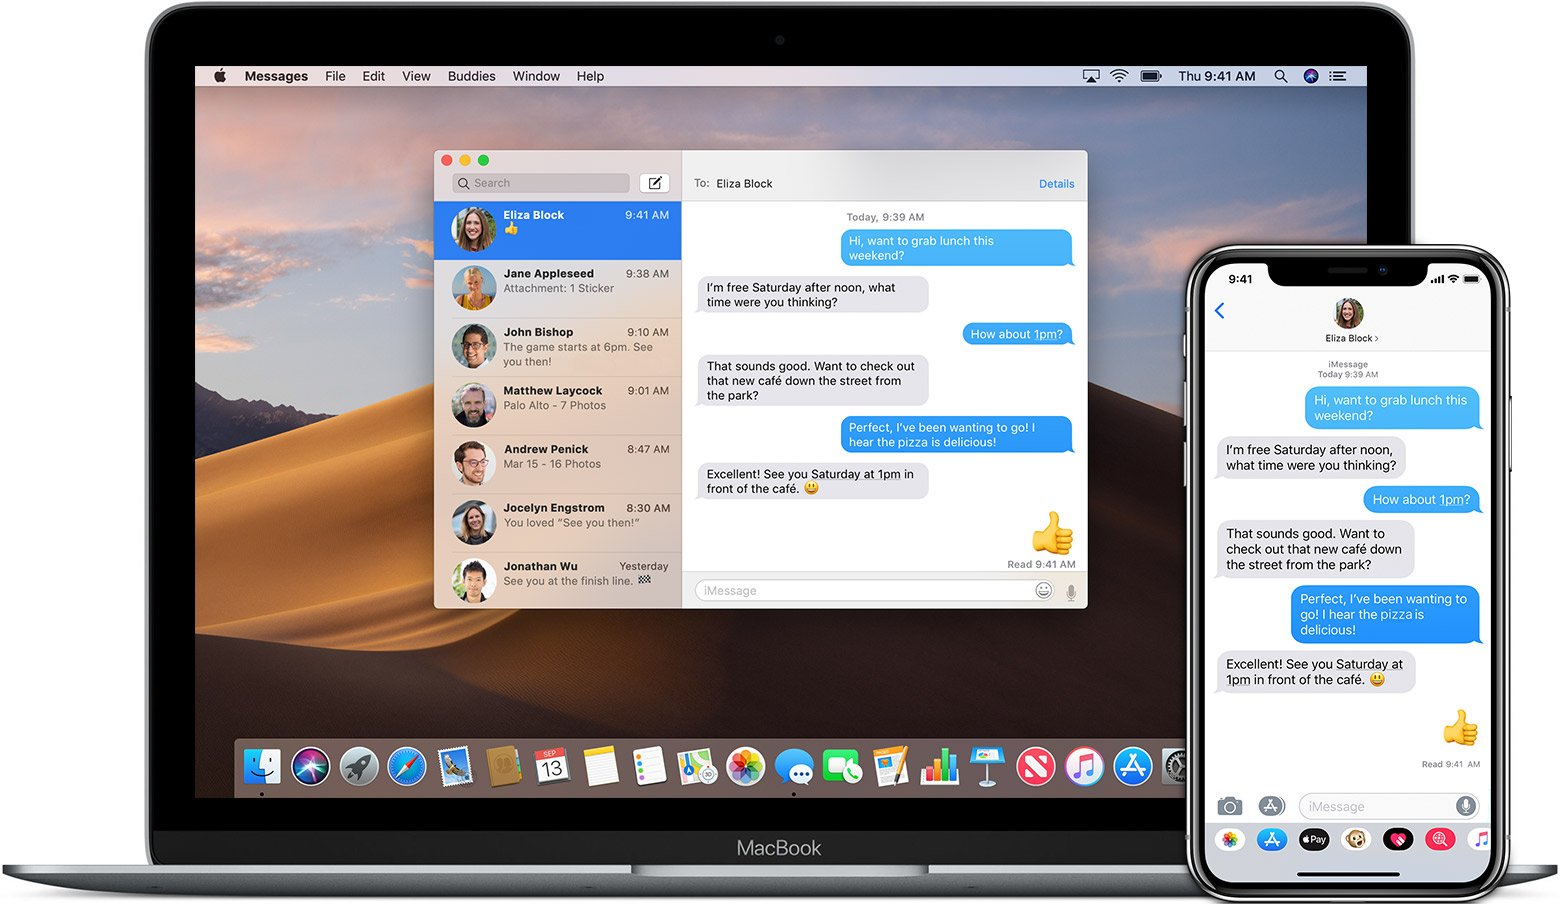 How To Use Phone Number For Imessage On Mac